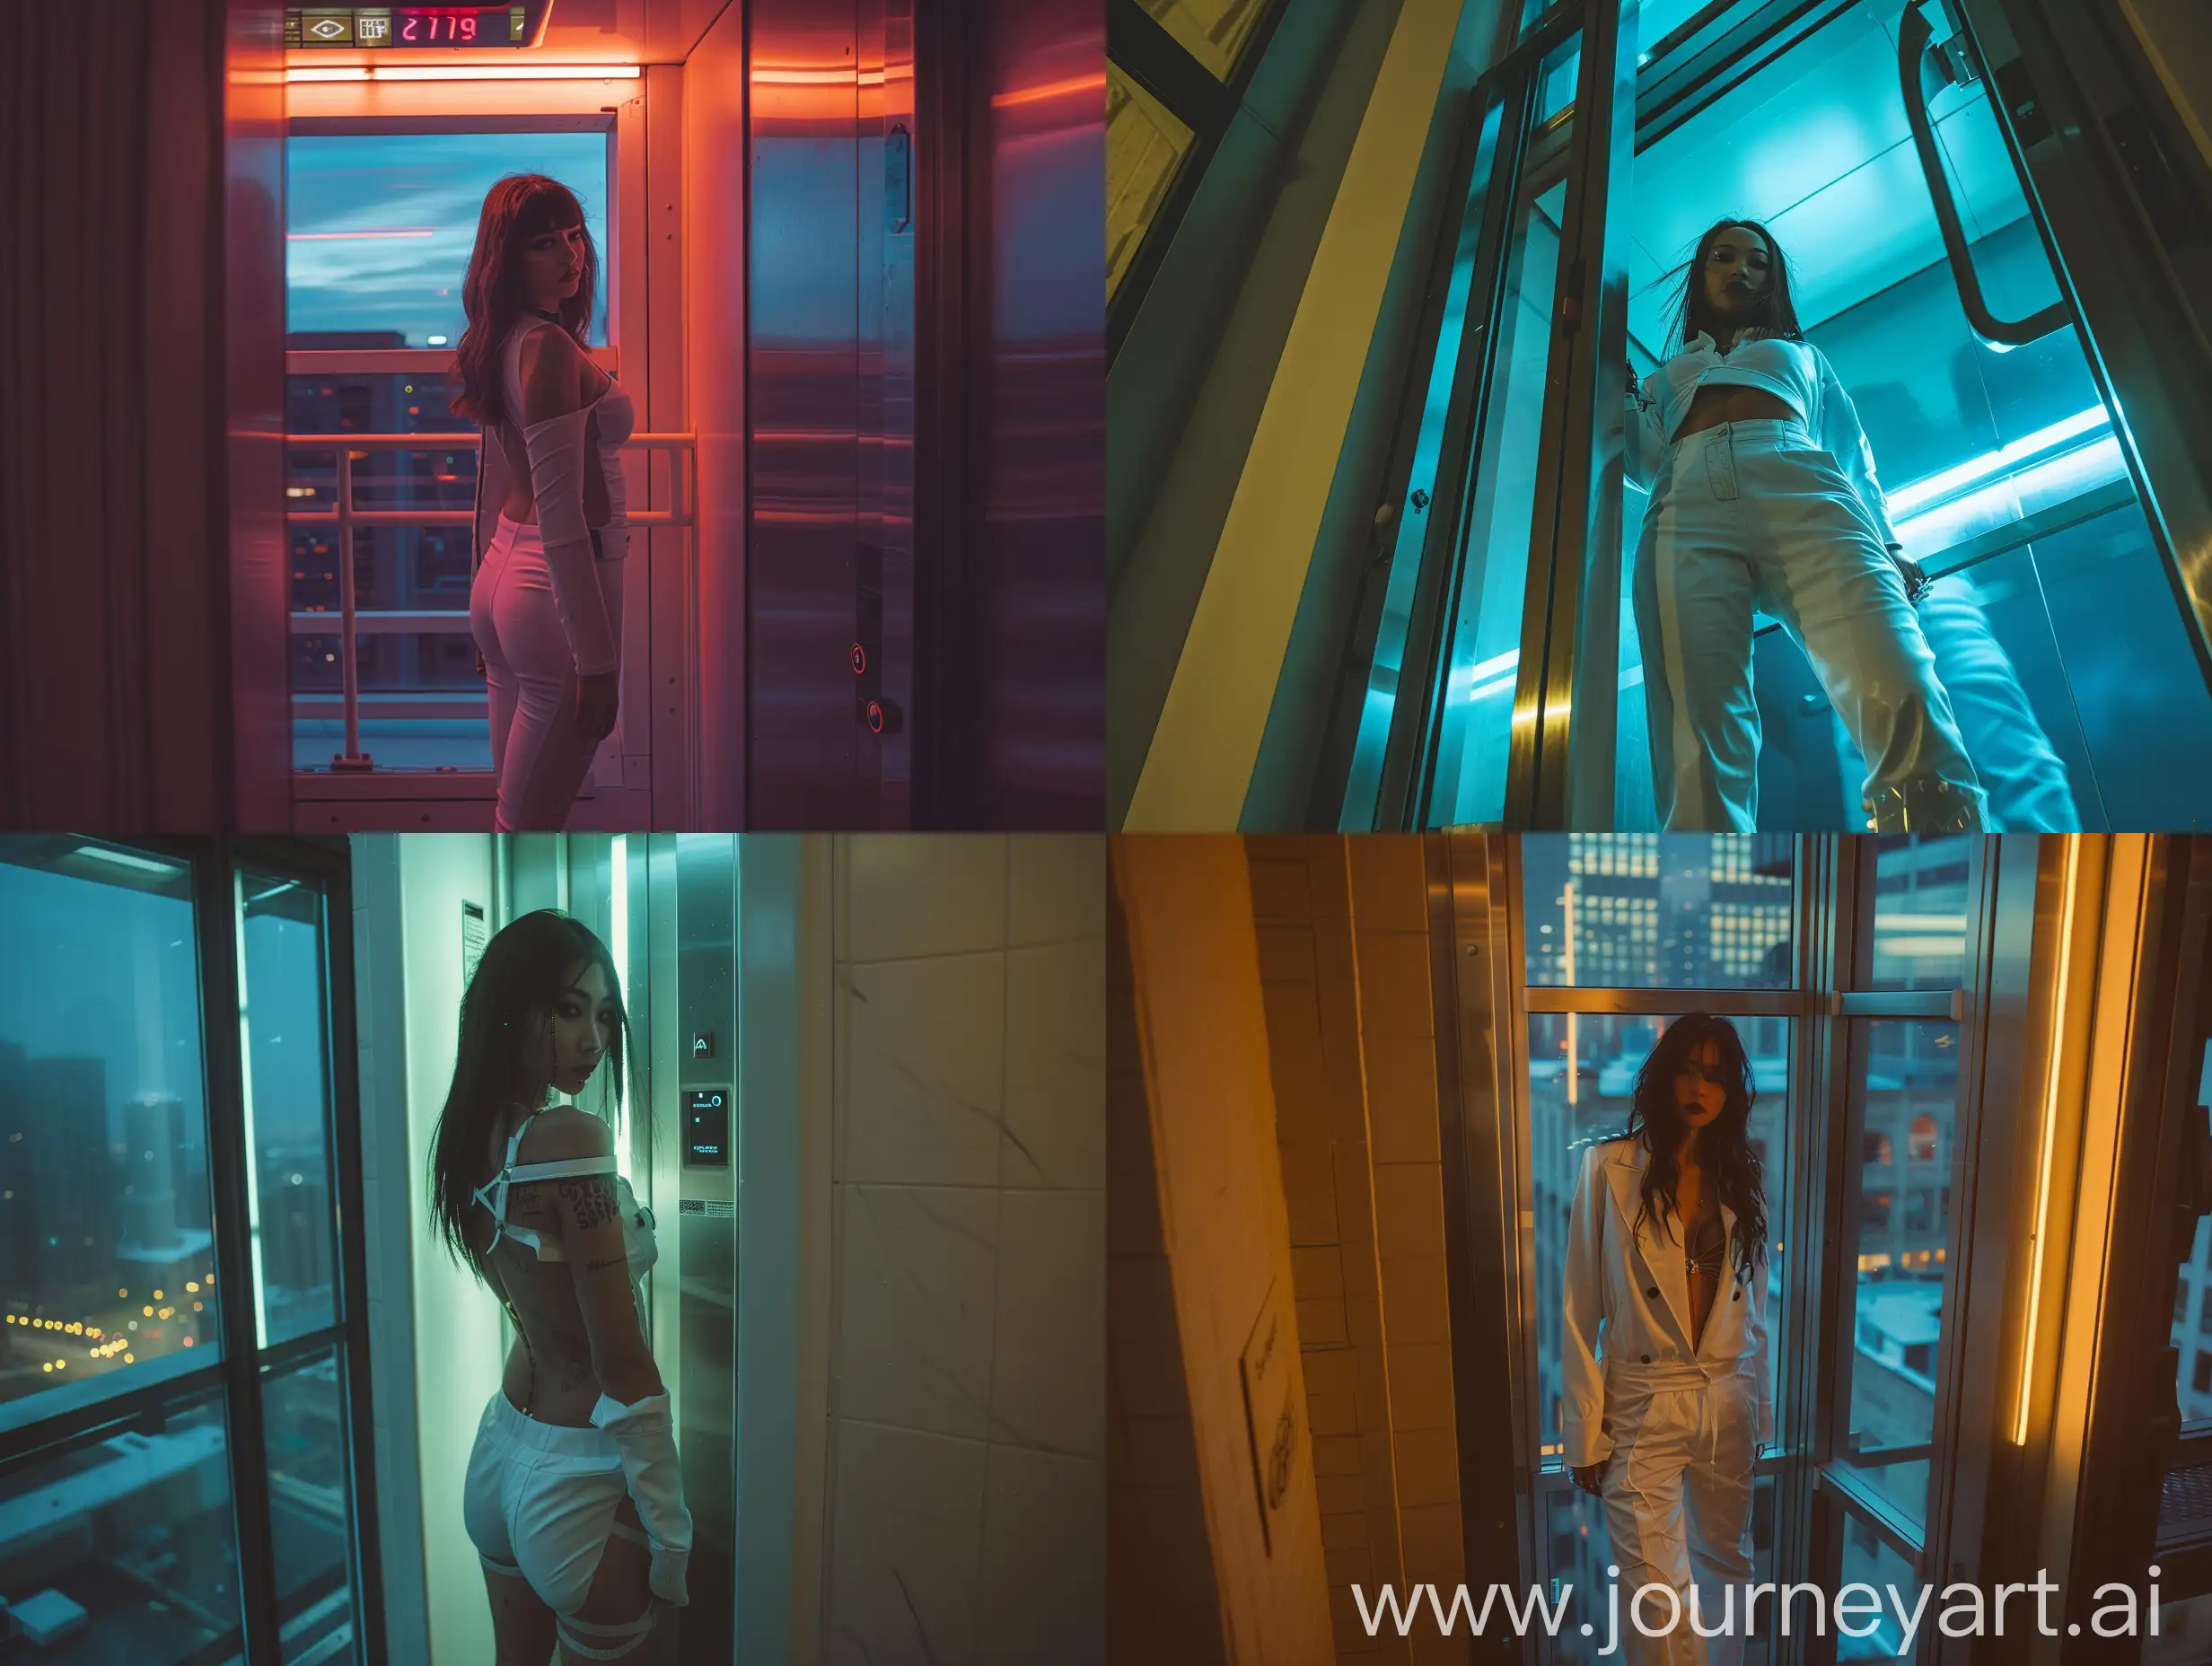 a phone photo of a cyberpunk woman standing inside a elevator near a window, wearing a white outfit, soft lighting, style raw posted on reddit in 2019, environment, Chicago, nighttime,
